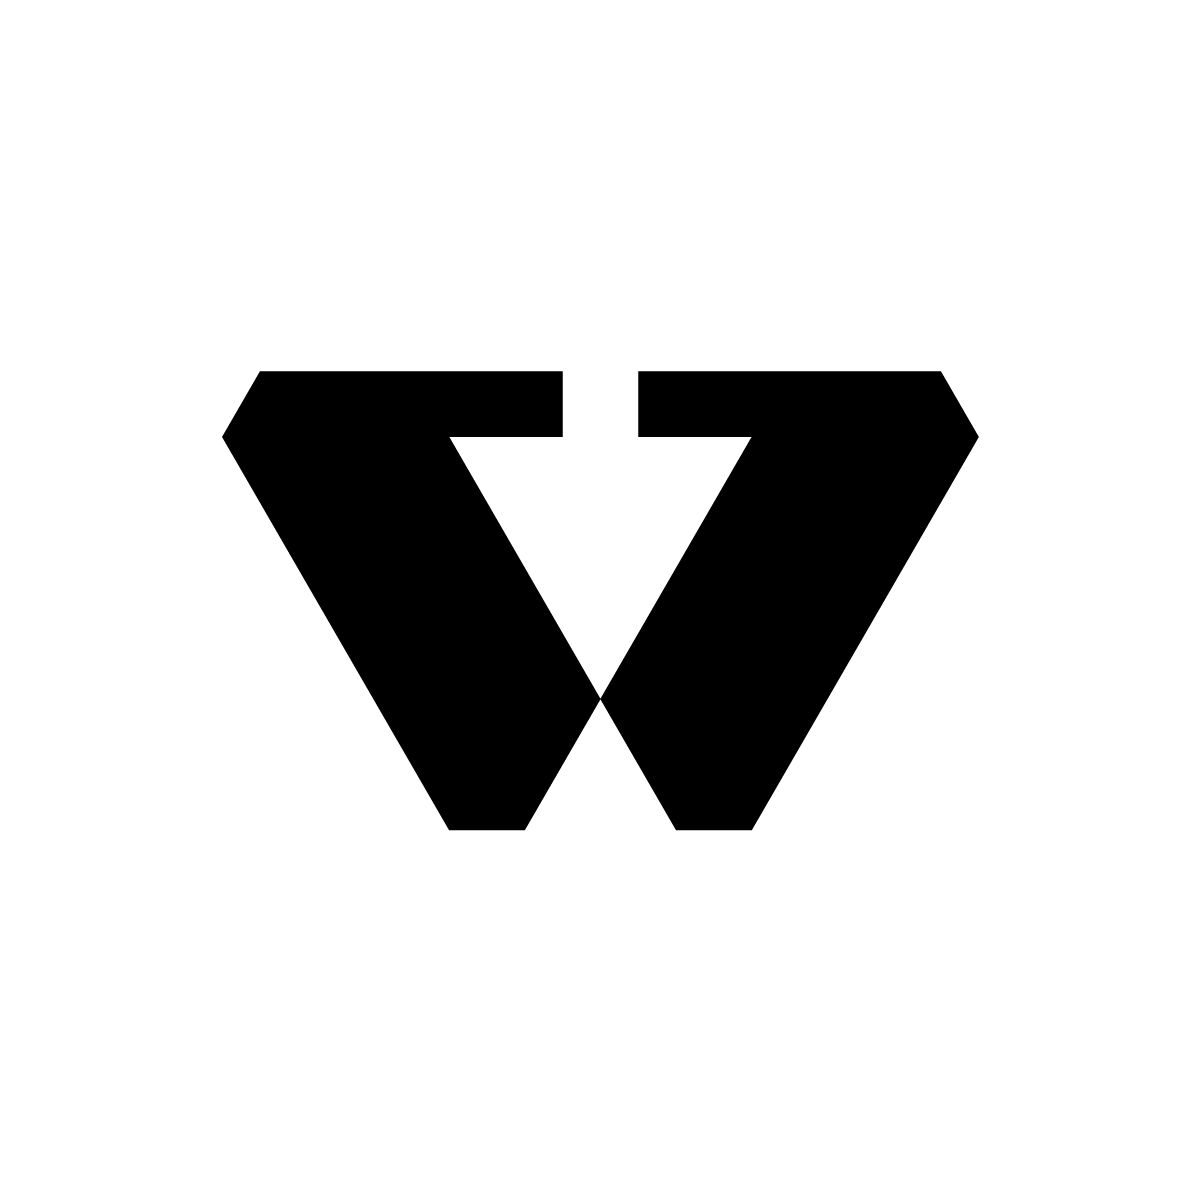 Geometrical Letter W Logo: Minimal design with a downward arrow in negative space.